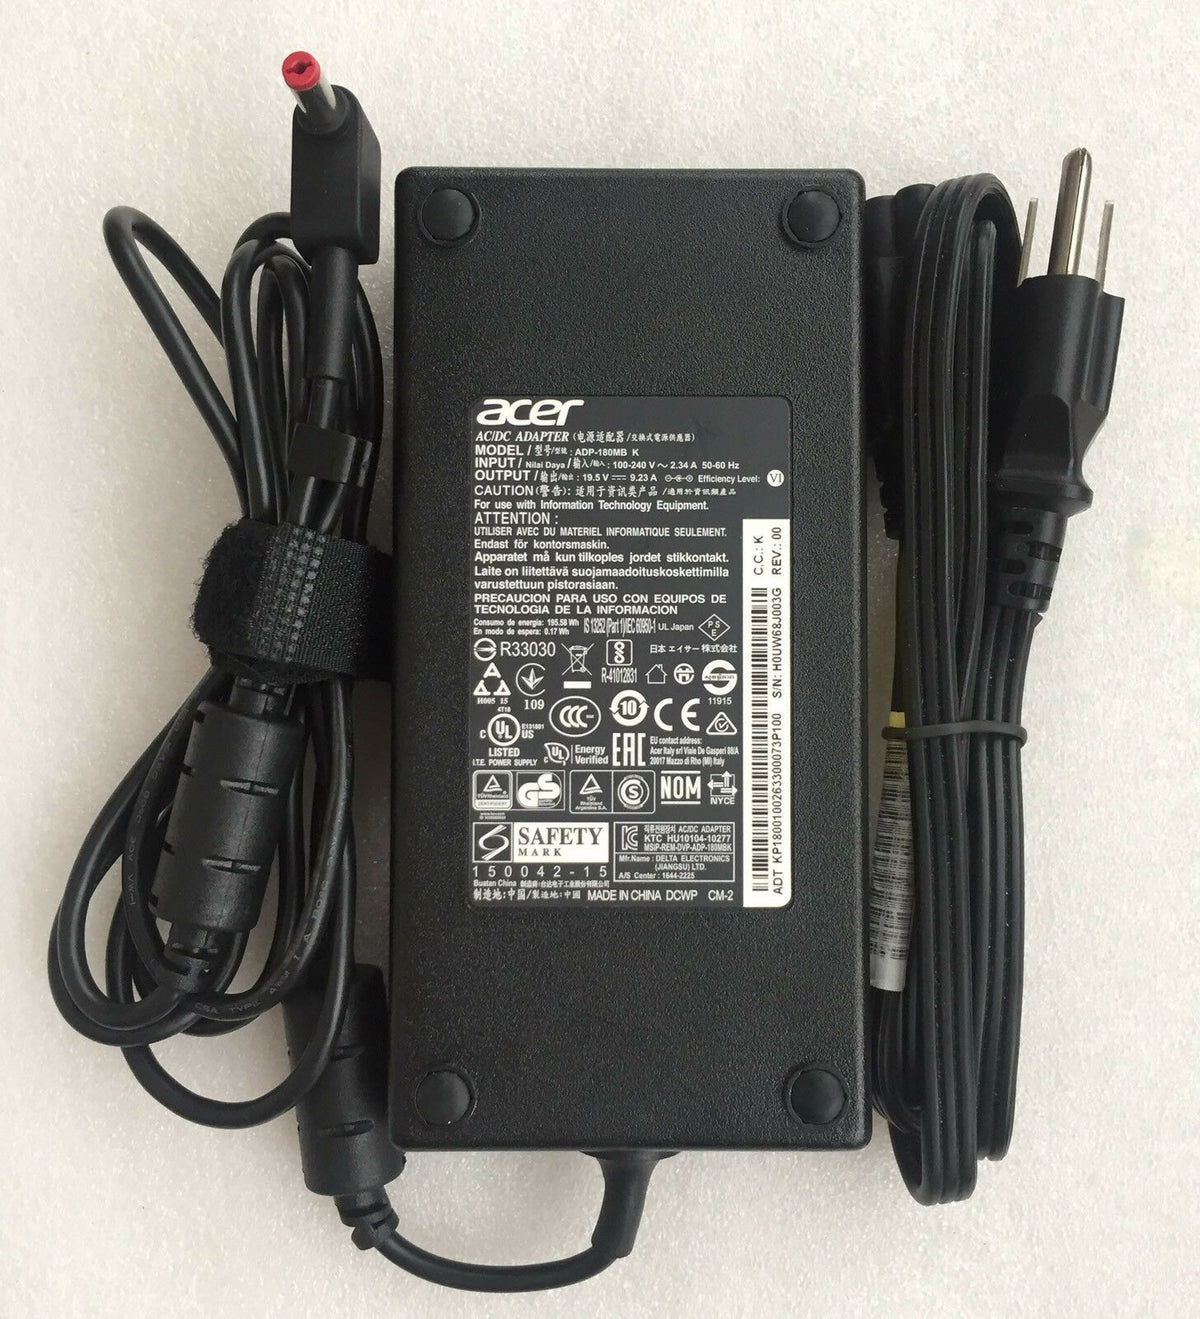 Acer Original Power Supply Laptop AC Adapter/Charger 19.5v 9.23a 180w (5.5*1.7mm) for Acer 300 PH317-51-78H7